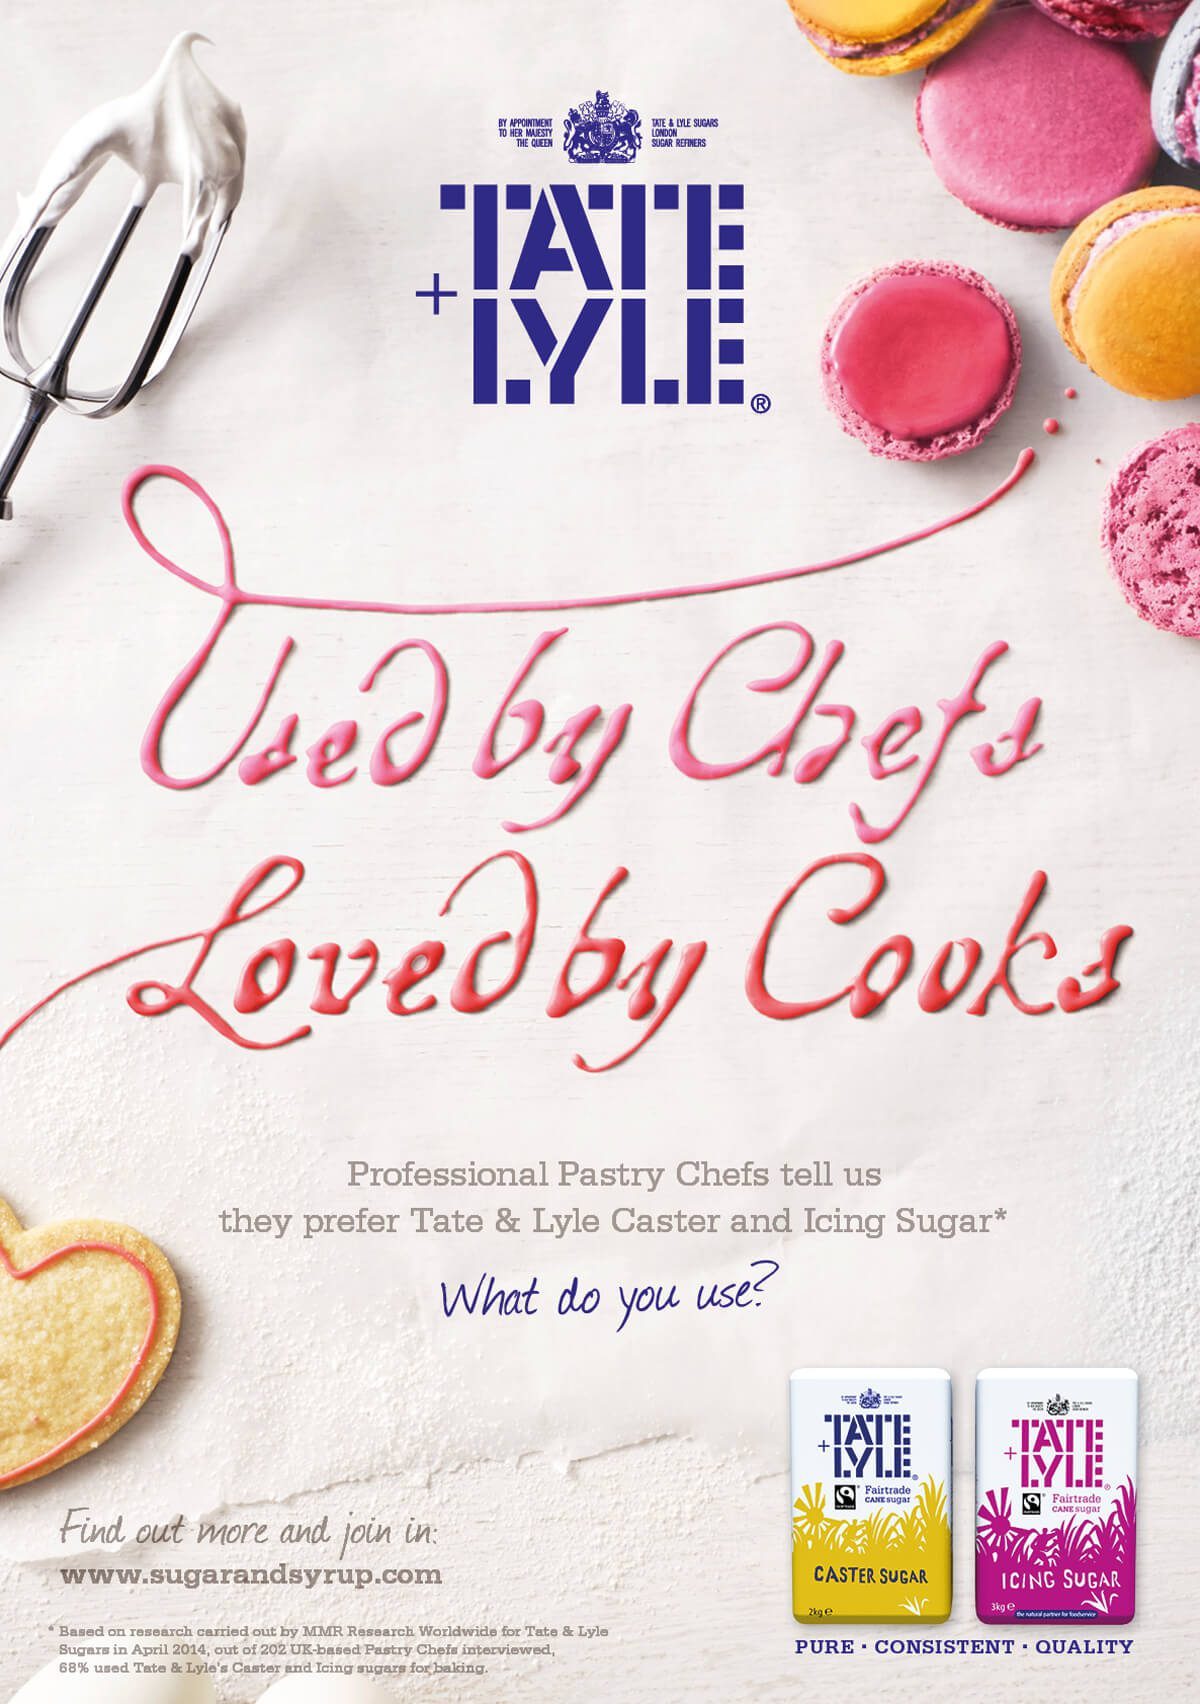 Tate and lyle used by chefs loved by cooks advert design